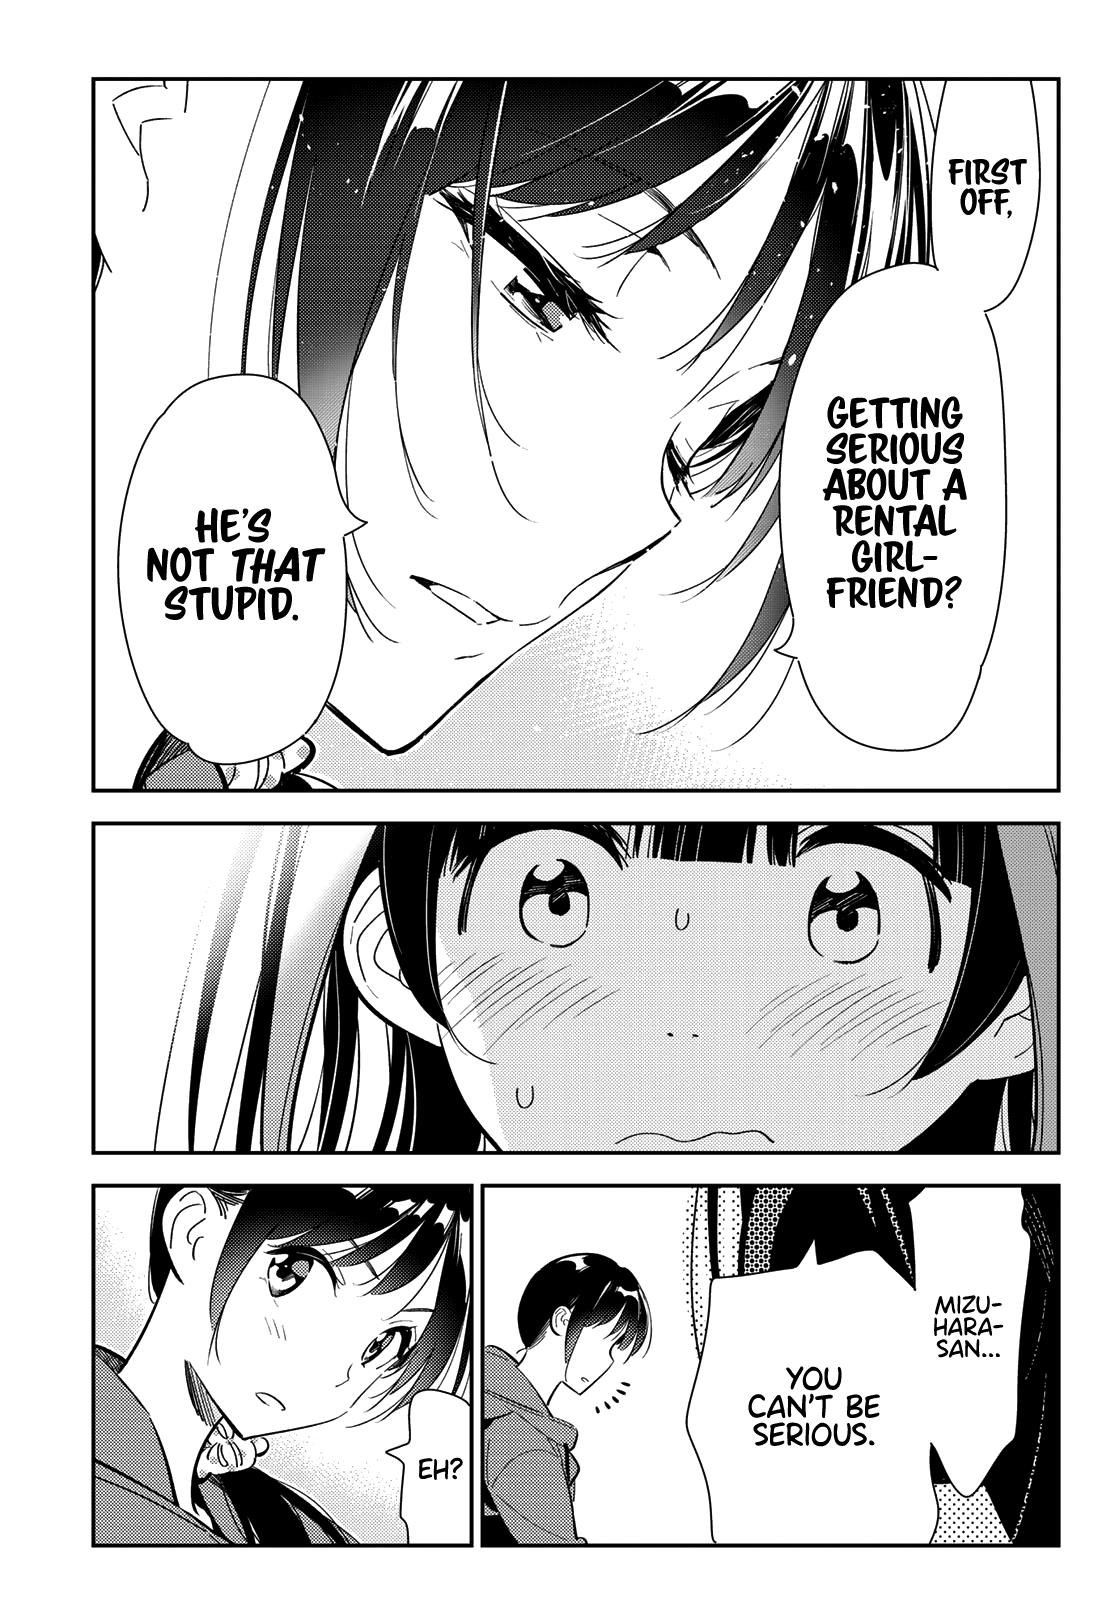 Rent A GirlFriend, Chapter 122 image 006